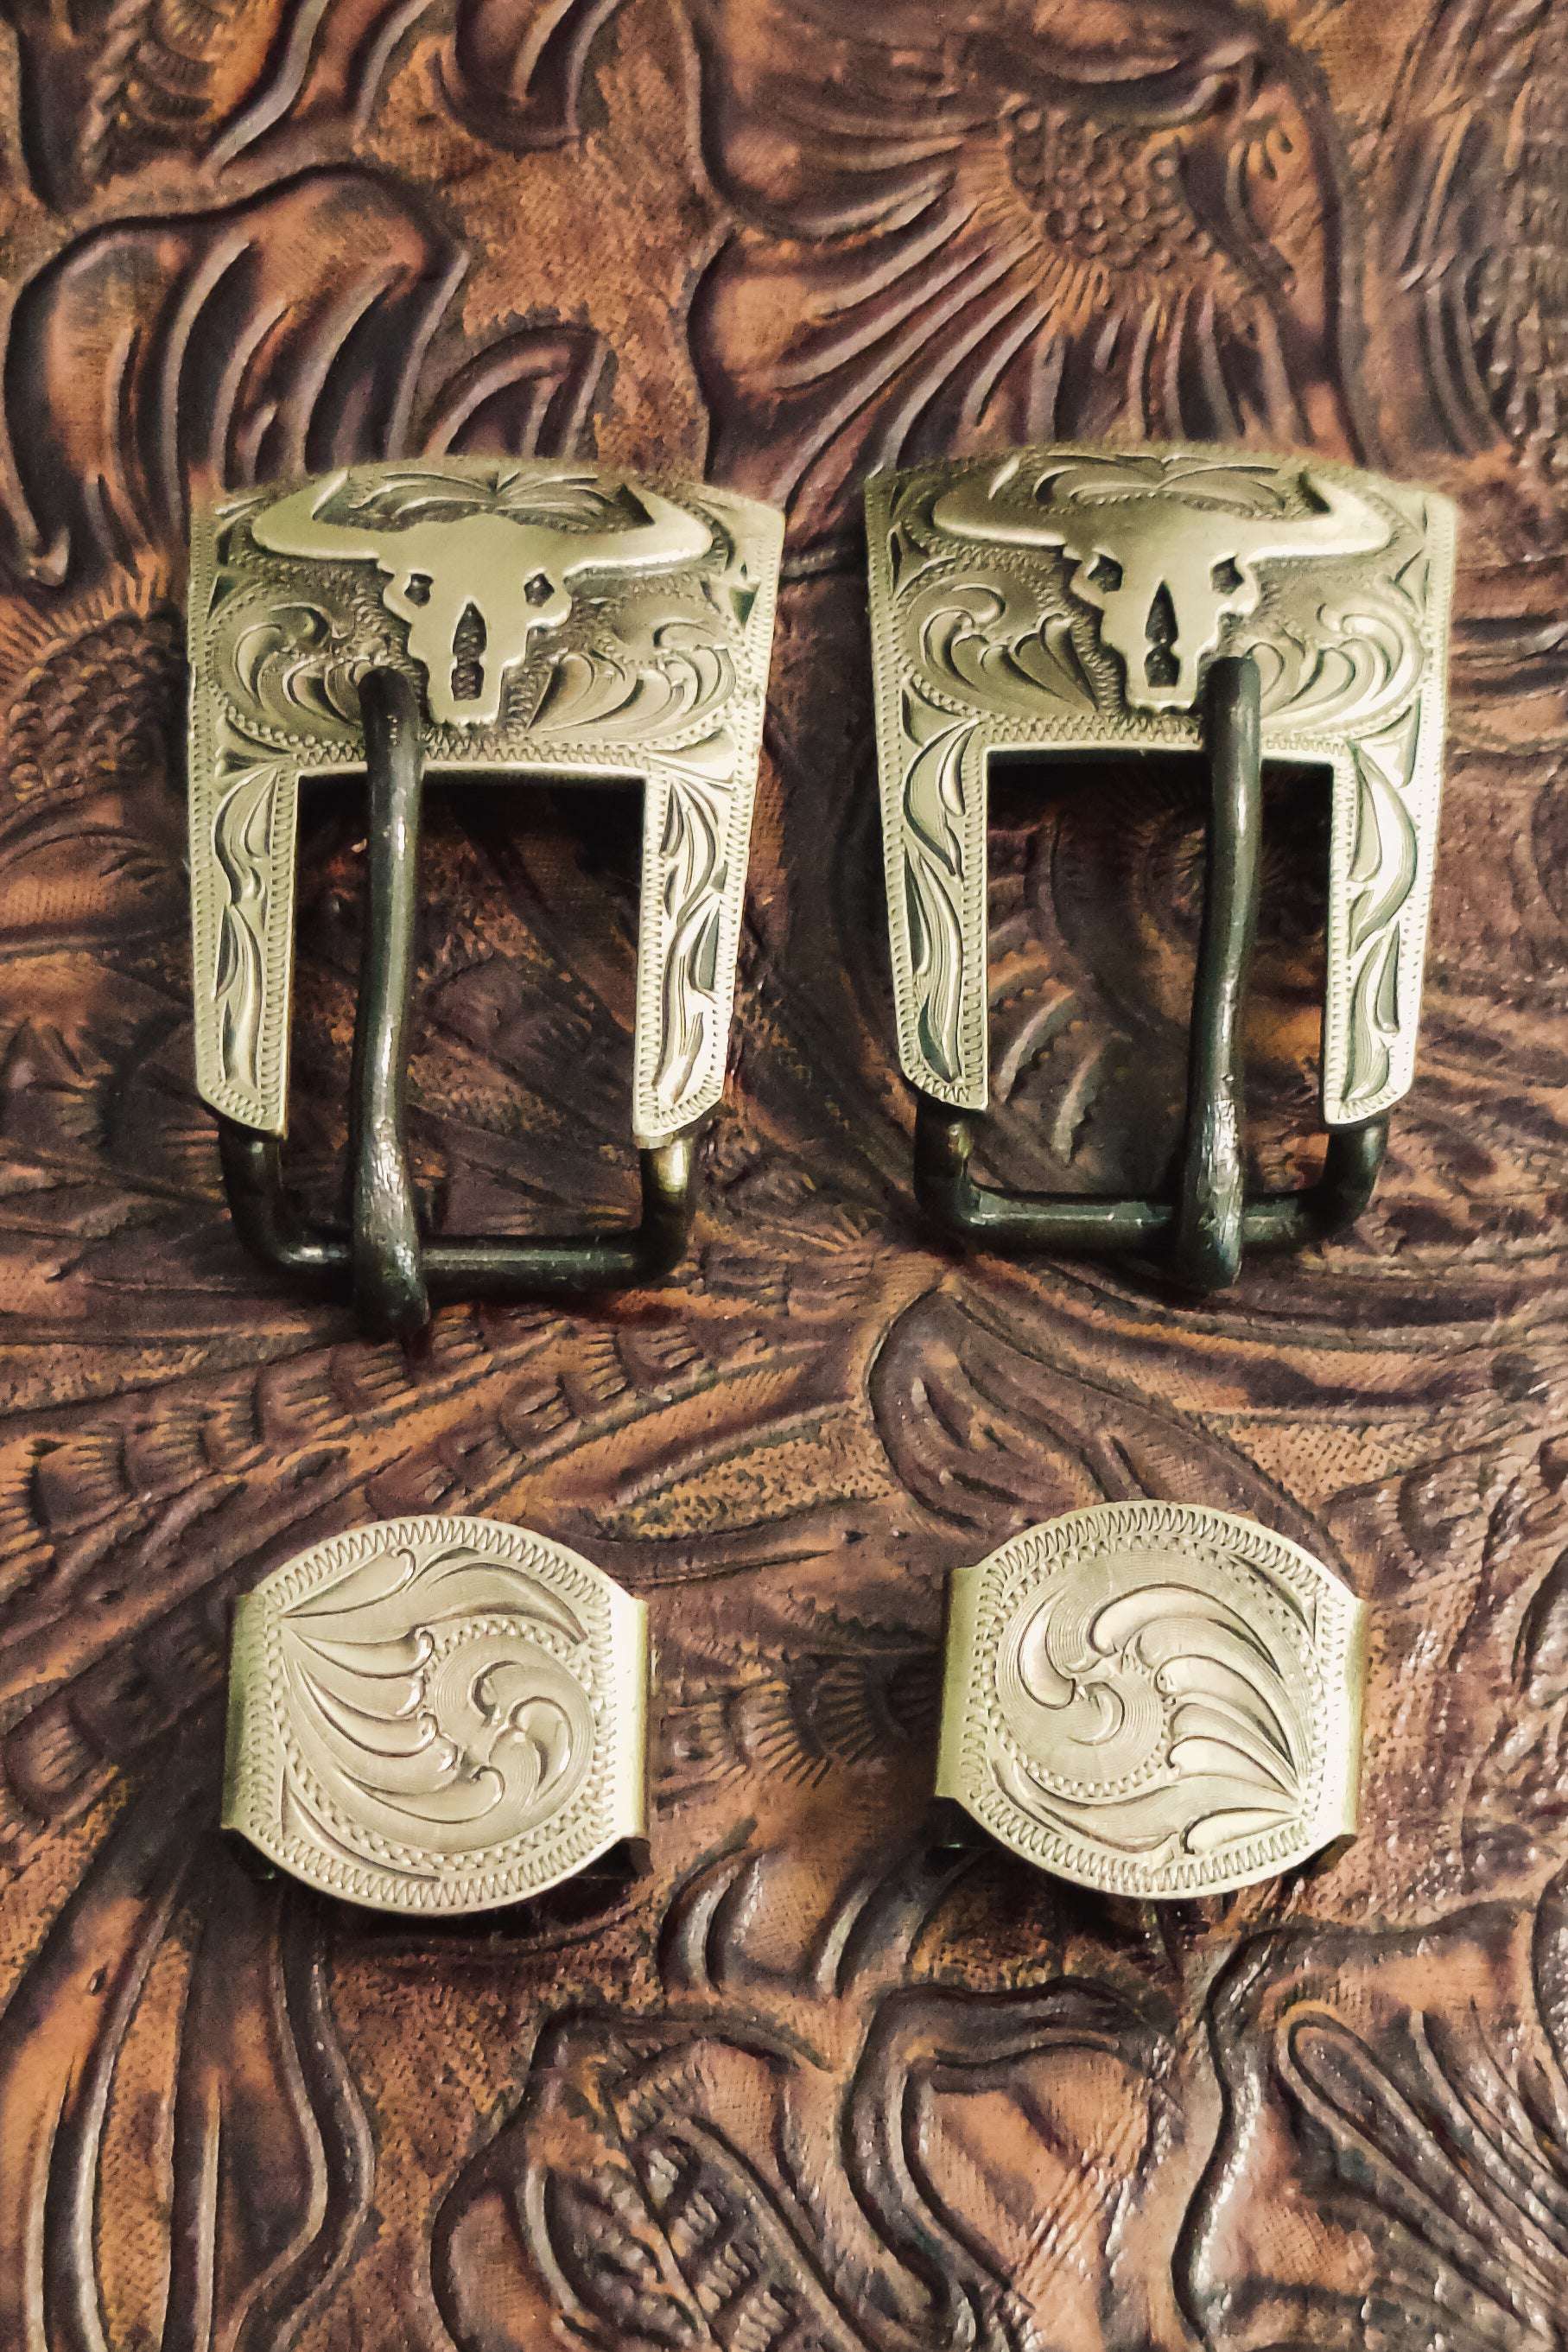 Take No Bull Cowskull Buckles - The Glamorous Cowgirl